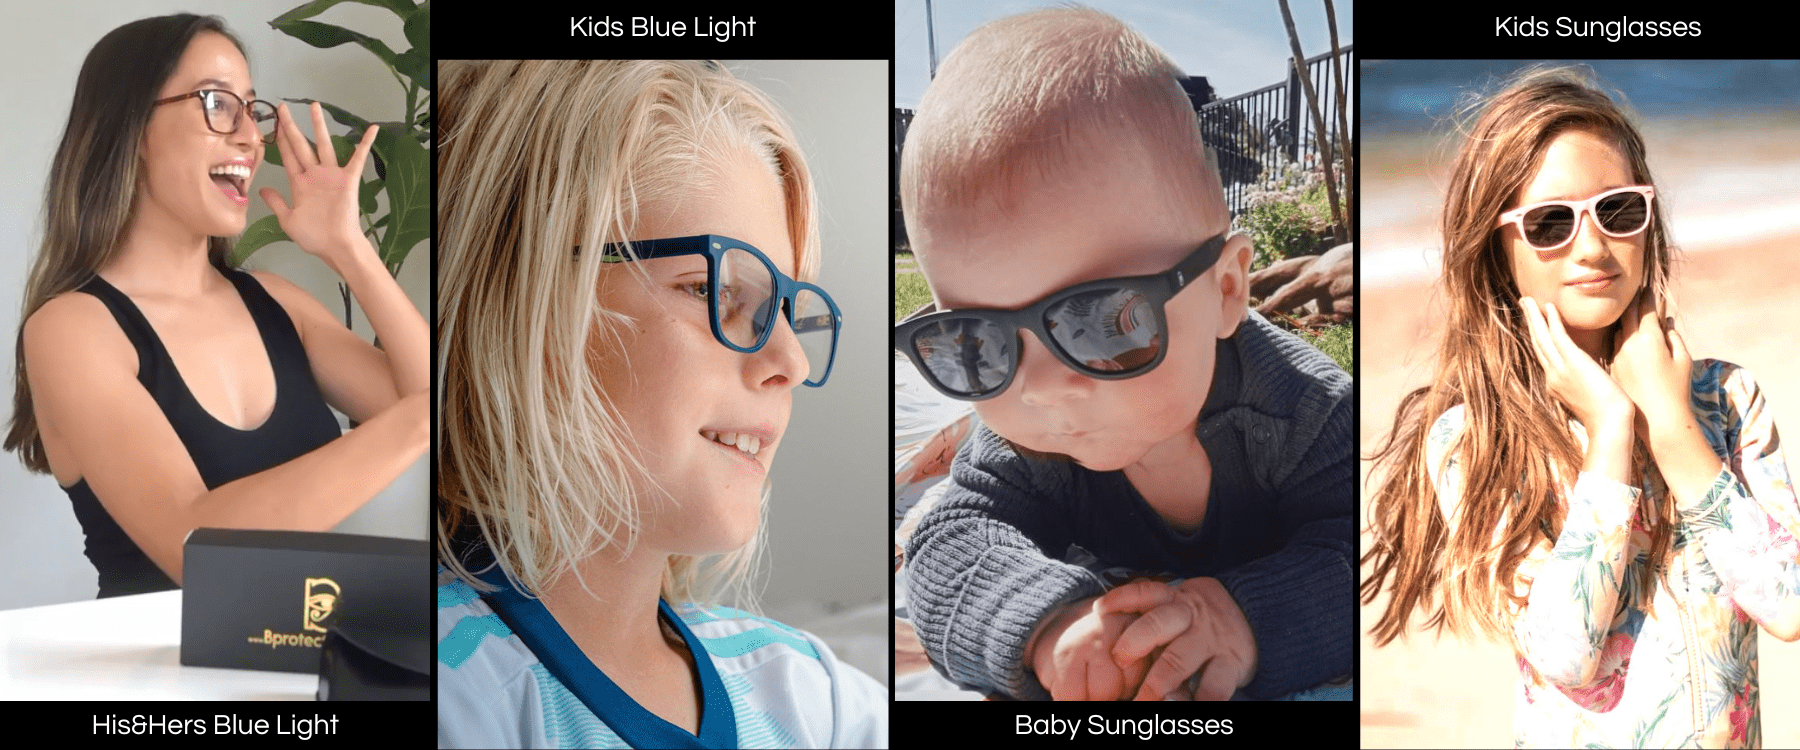 Bprotectedstore Blue Light Glasses for the whole Family, Baby and Kids Sunglasses